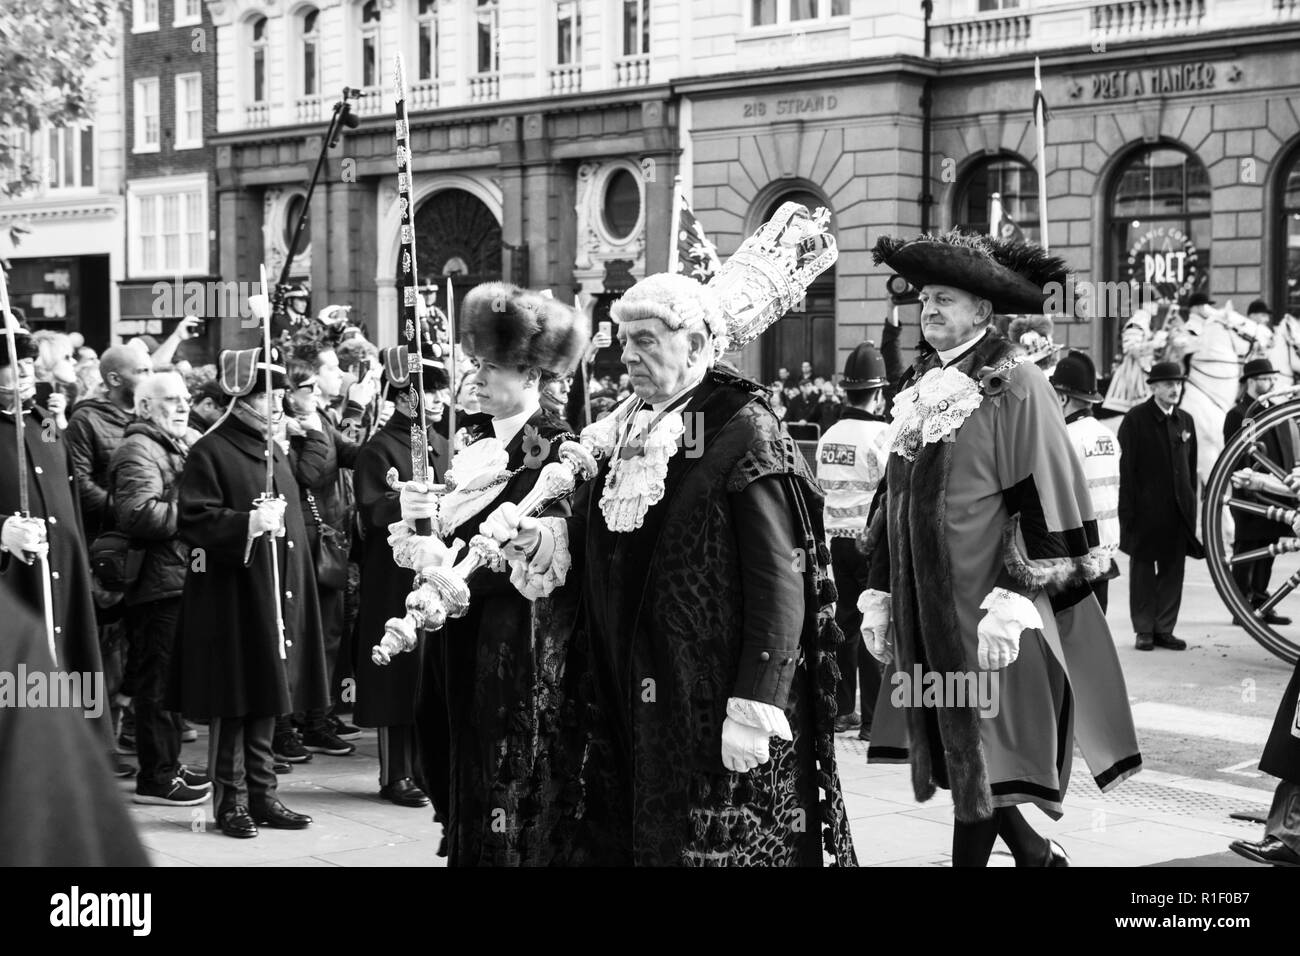 A day in the life of The Lord Mayor of London, Peter Estlin, at the Lord Mayors Show 2018, in the City of London. (Black and white, b&w) Stock Photo